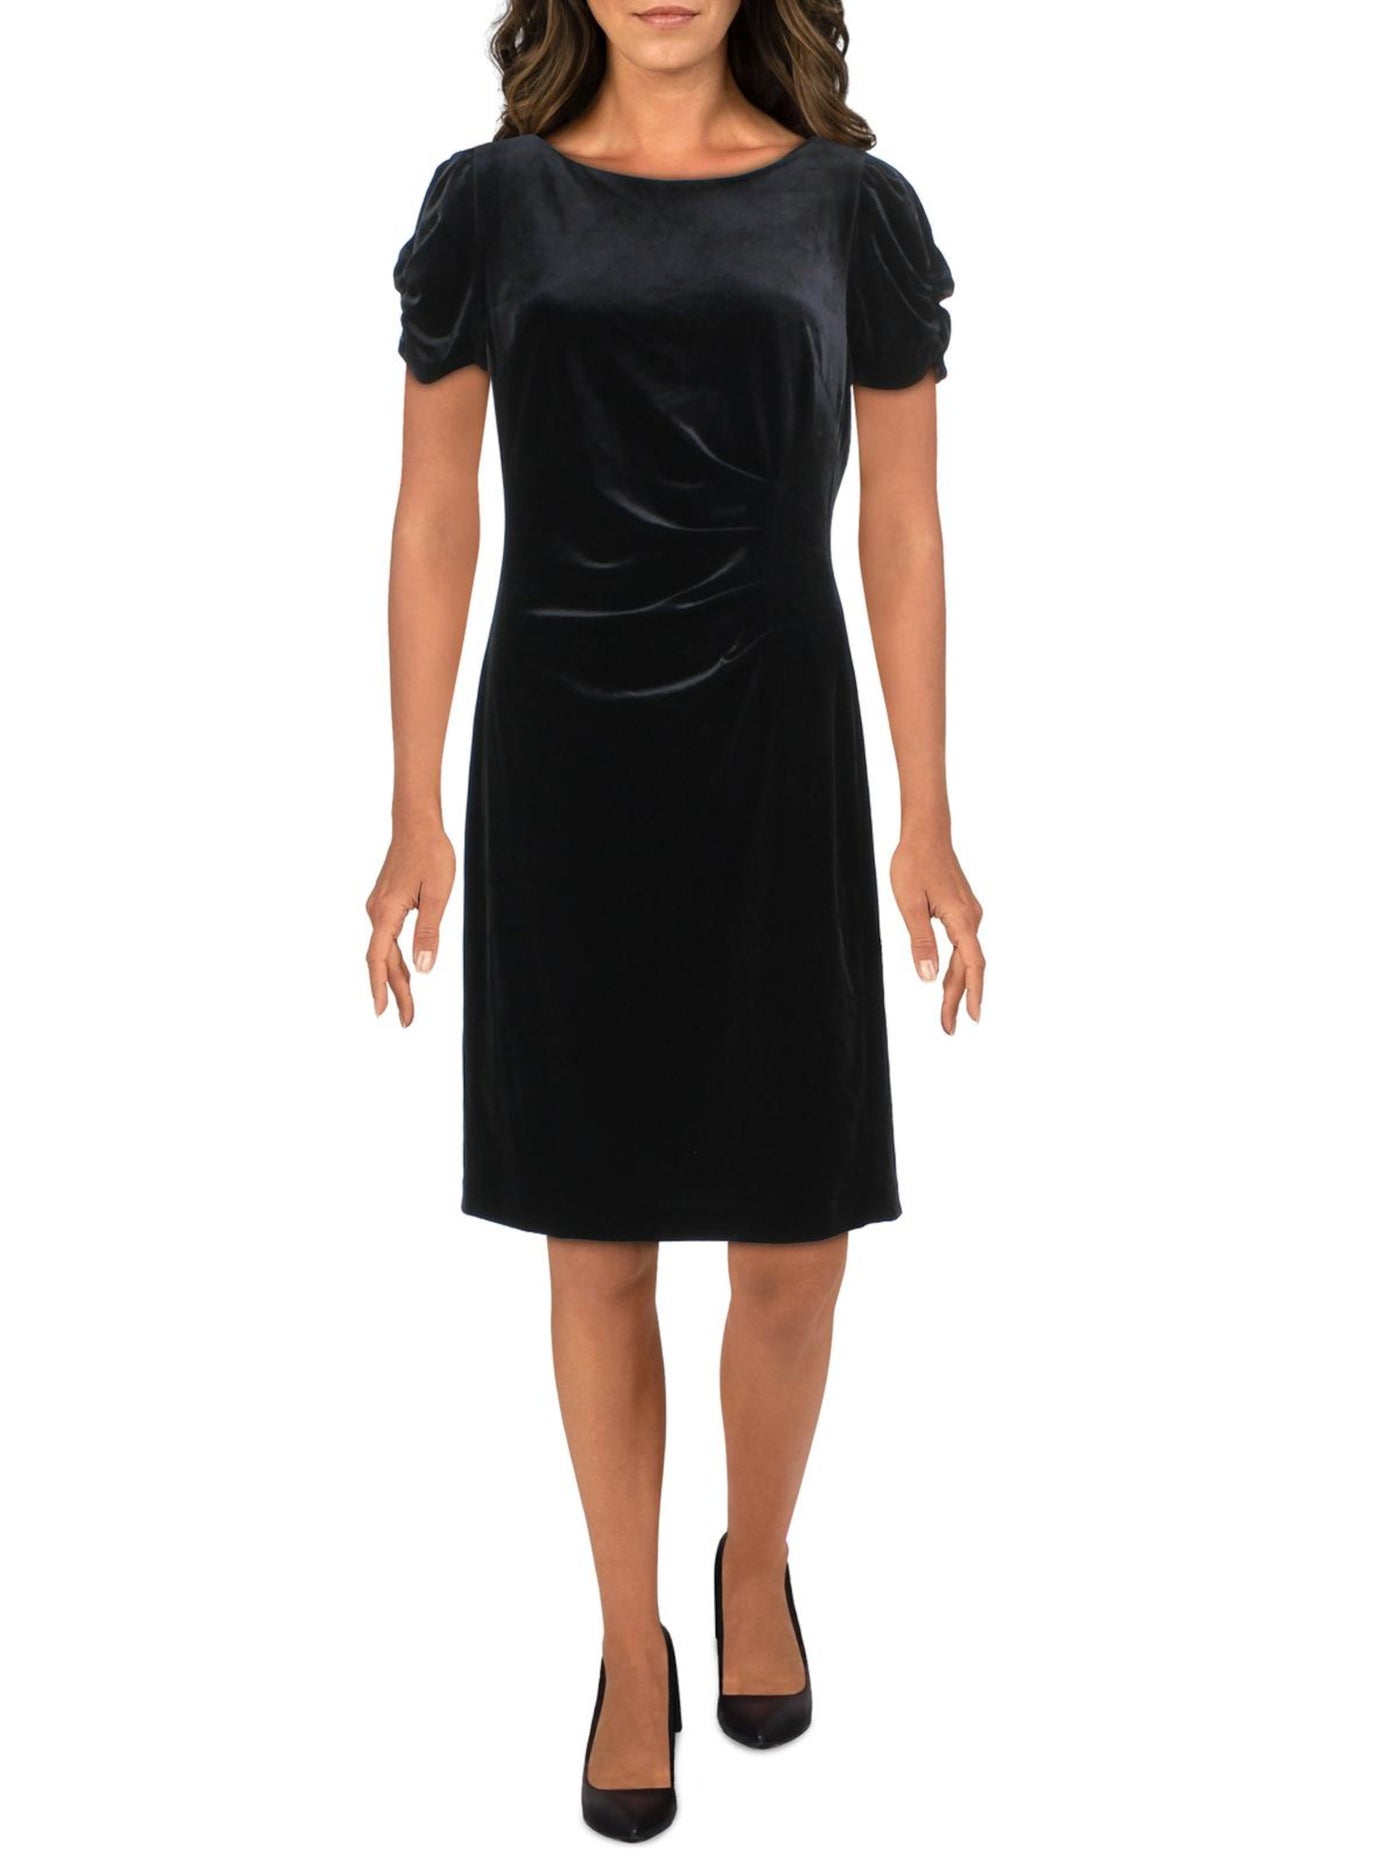 KARL LAGERFELD Womens Black Zippered Ruched Pouf Sleeve Round Neck Above The Knee Party Fit + Flare Dress 8